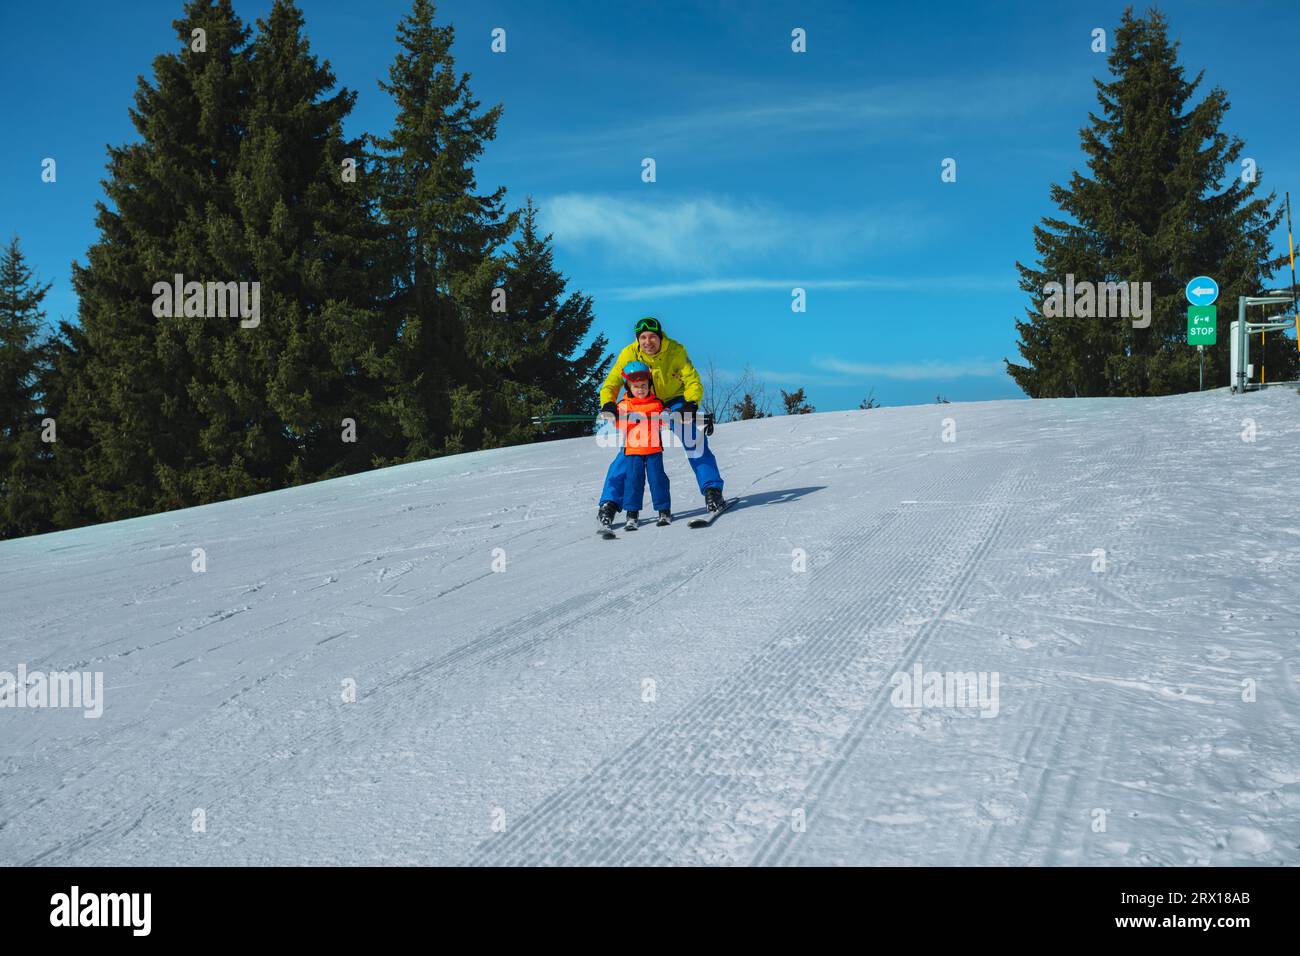 Dad teaches kid gliding behind holding ski poles together Stock Photo